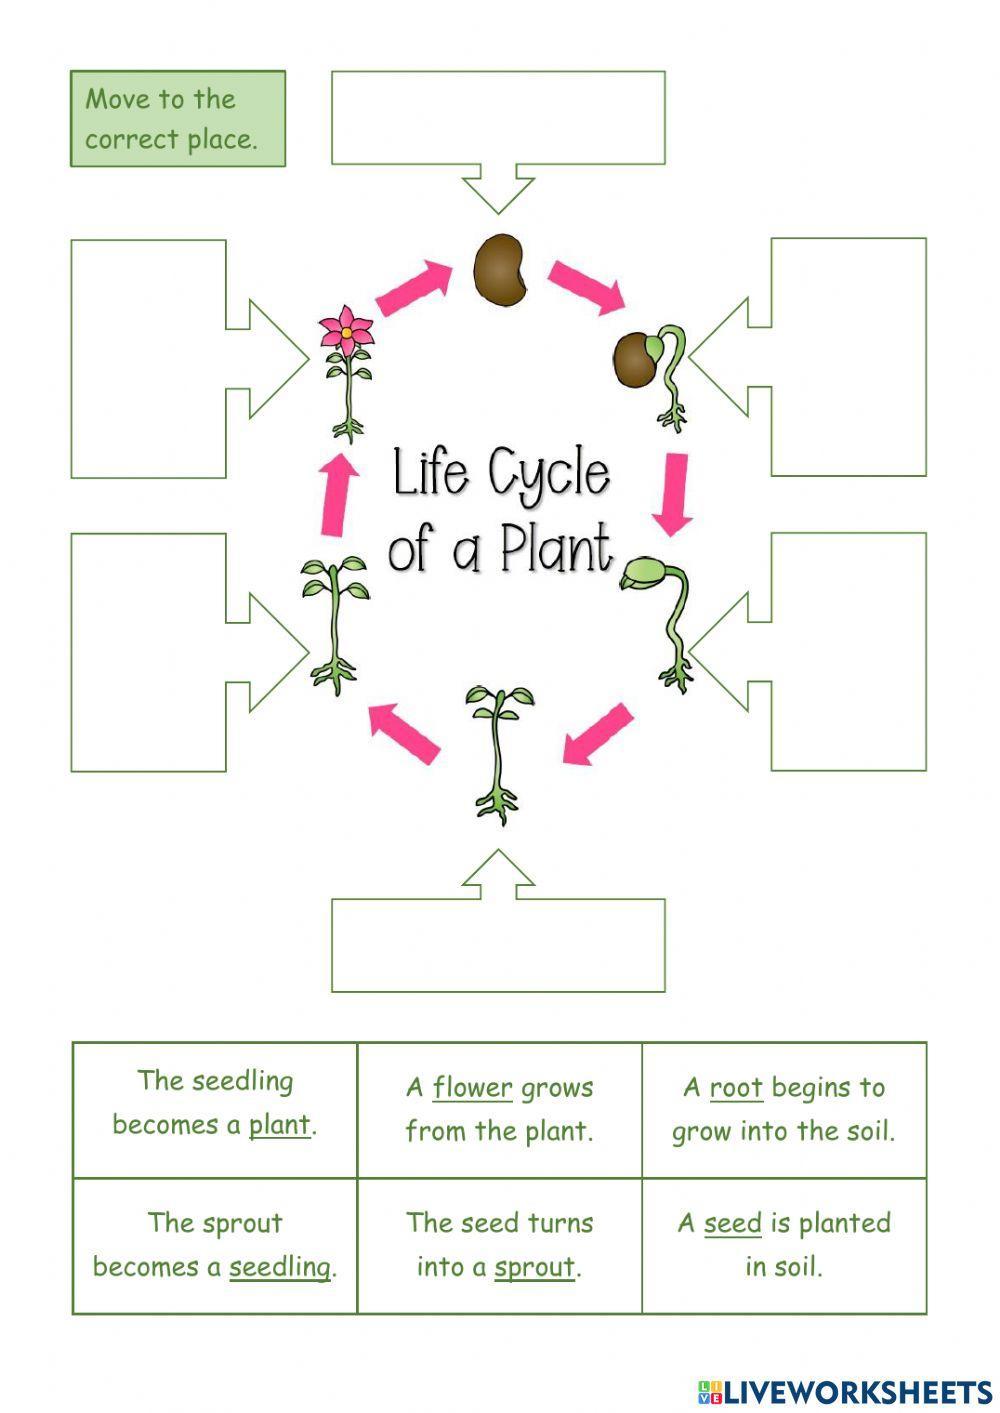 Life cycle of a plant.